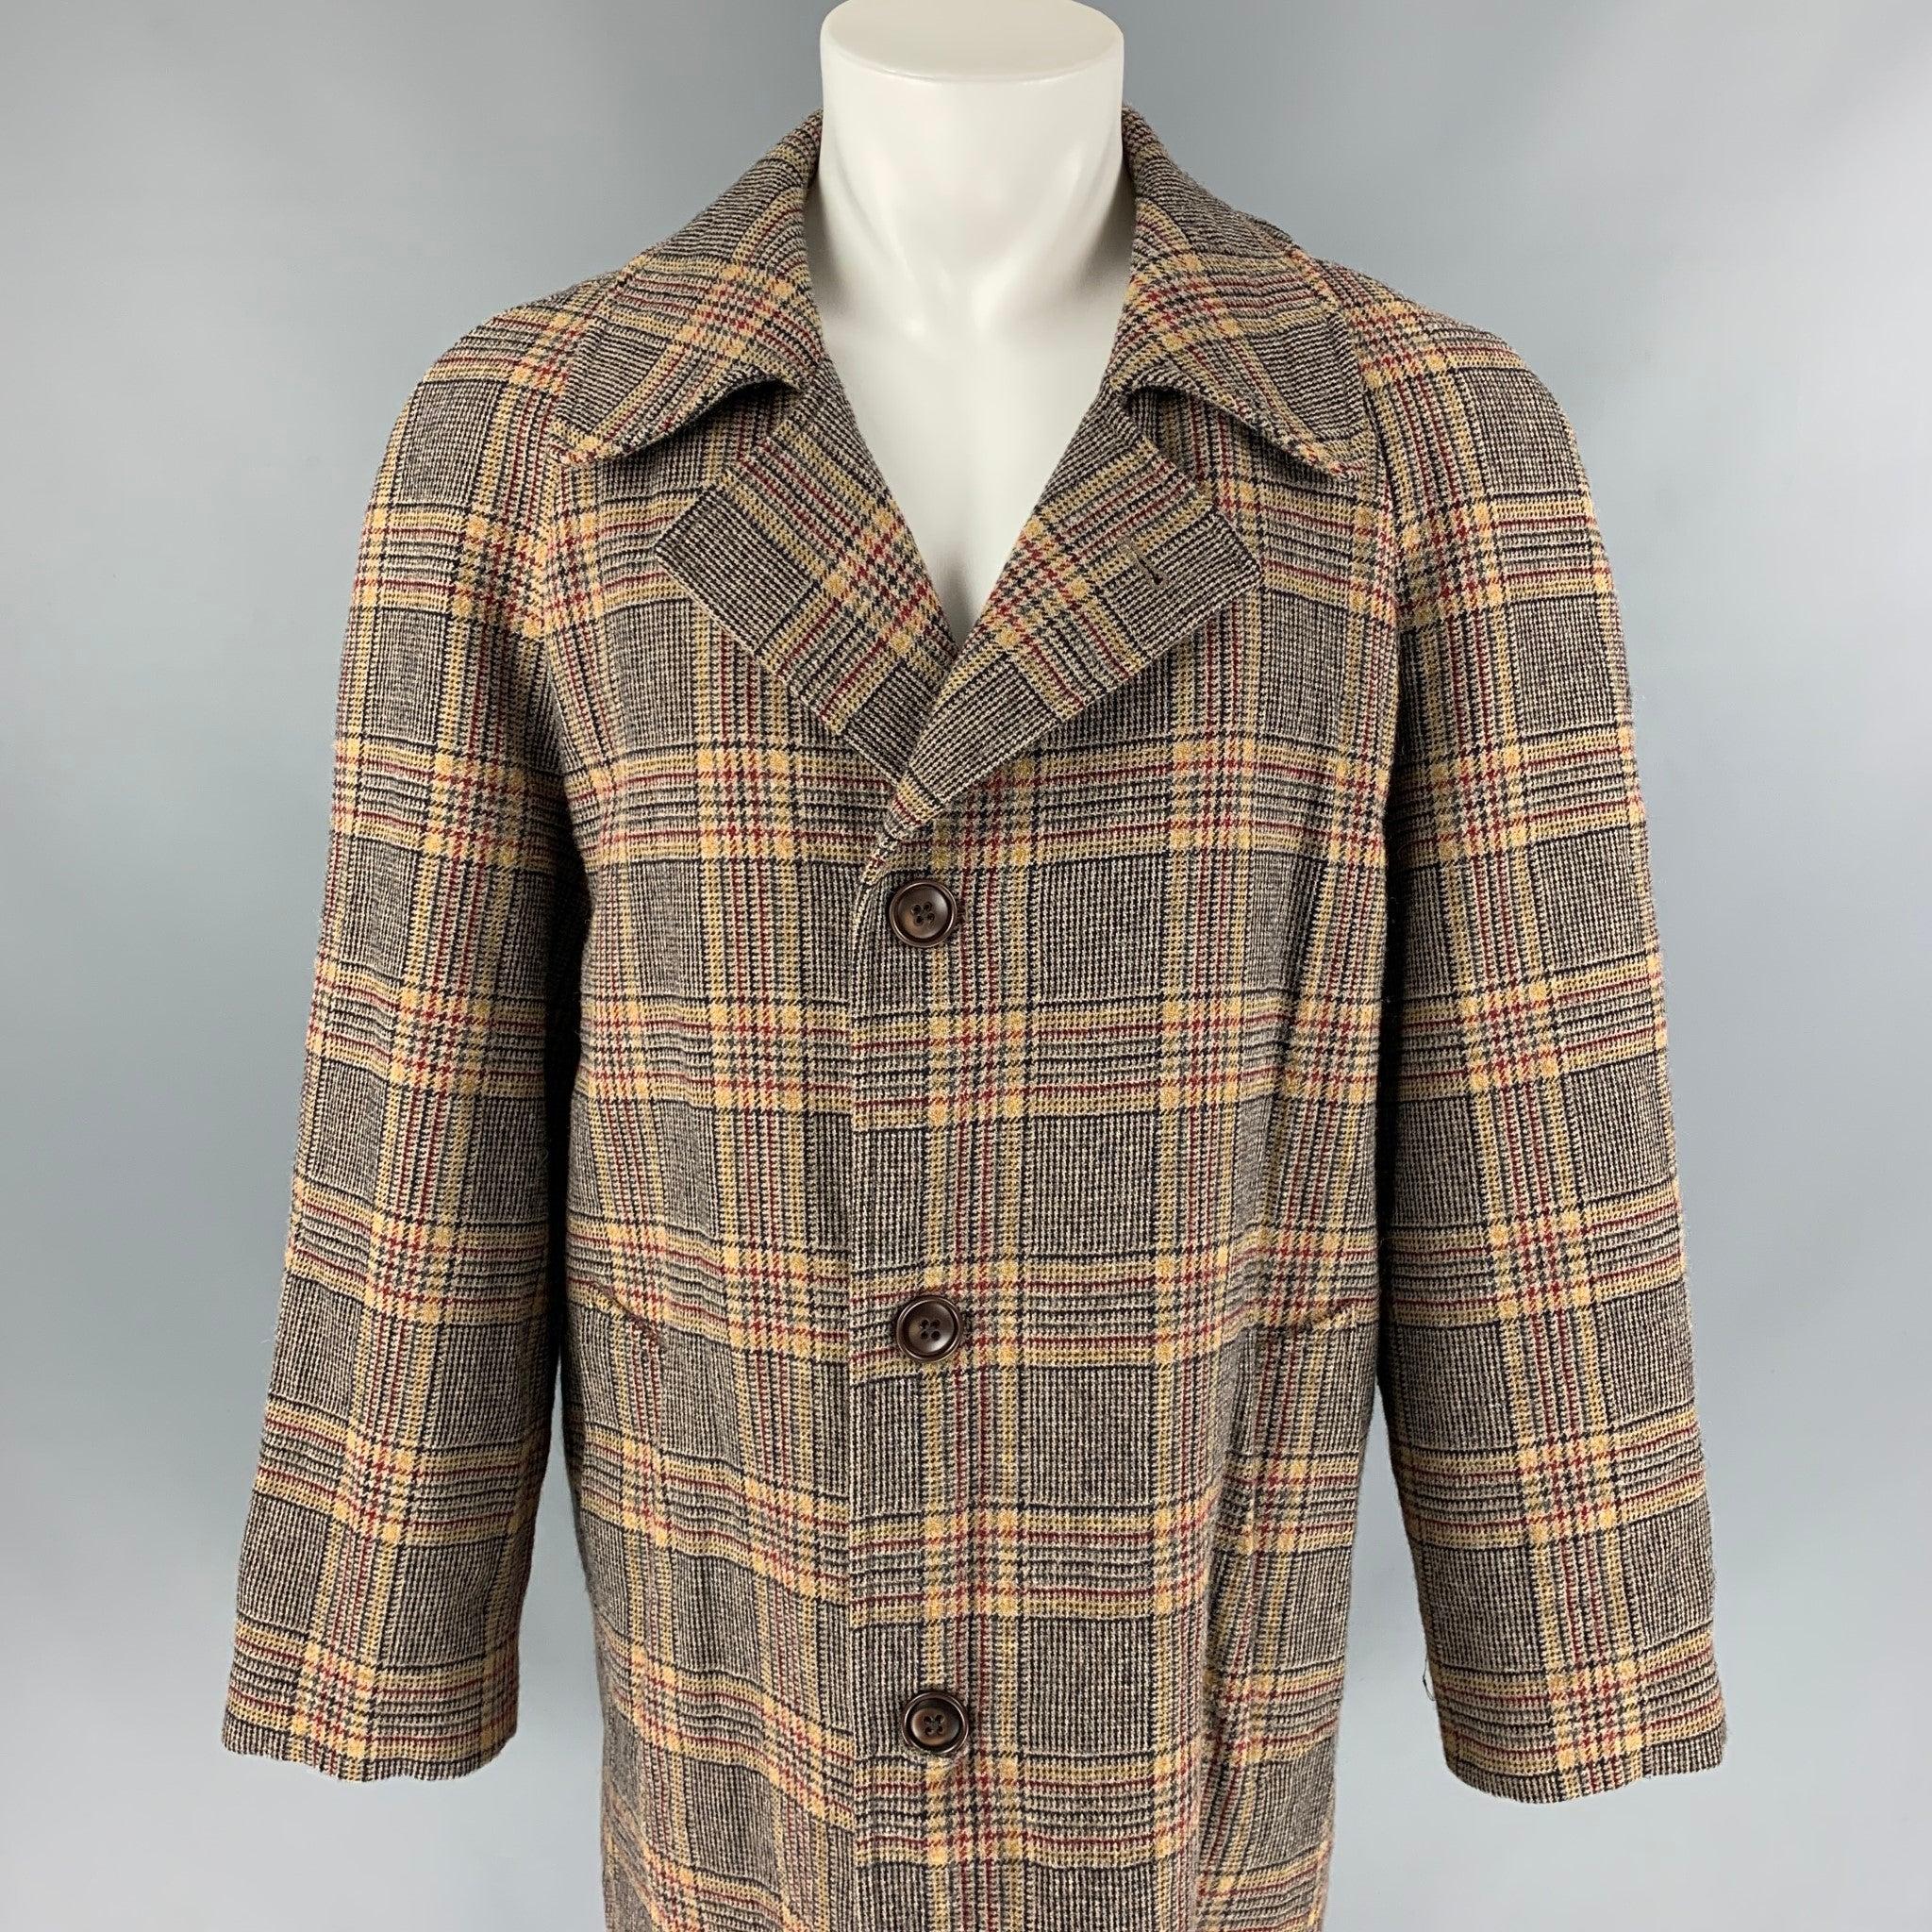 MARC JACOBS coat comes in a tan plaid wool with a full liner featuring a notch lapel, oversized fit, single back vent, slit pockets, and a buttoned closure. Made in Italy.
Very Good
Pre-Owned Condition. 

Marked:  48 

Measurements: 
 
Shoulder: 17